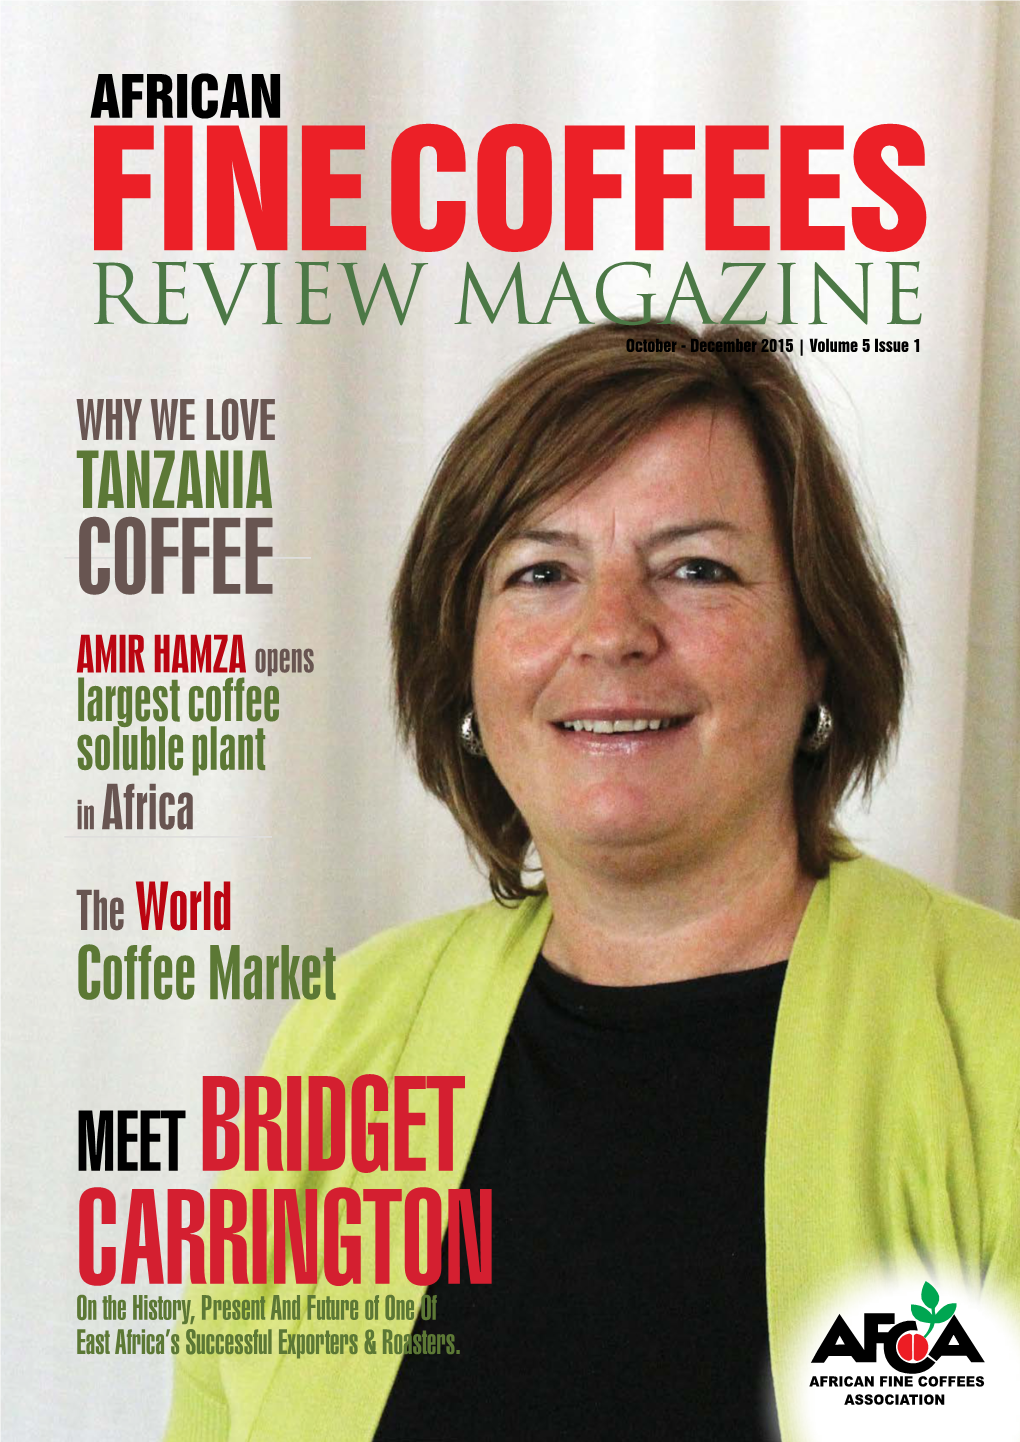 COFFEES REVIEW MAGAZINE October - December 2015 | Volume 5 Issue 1